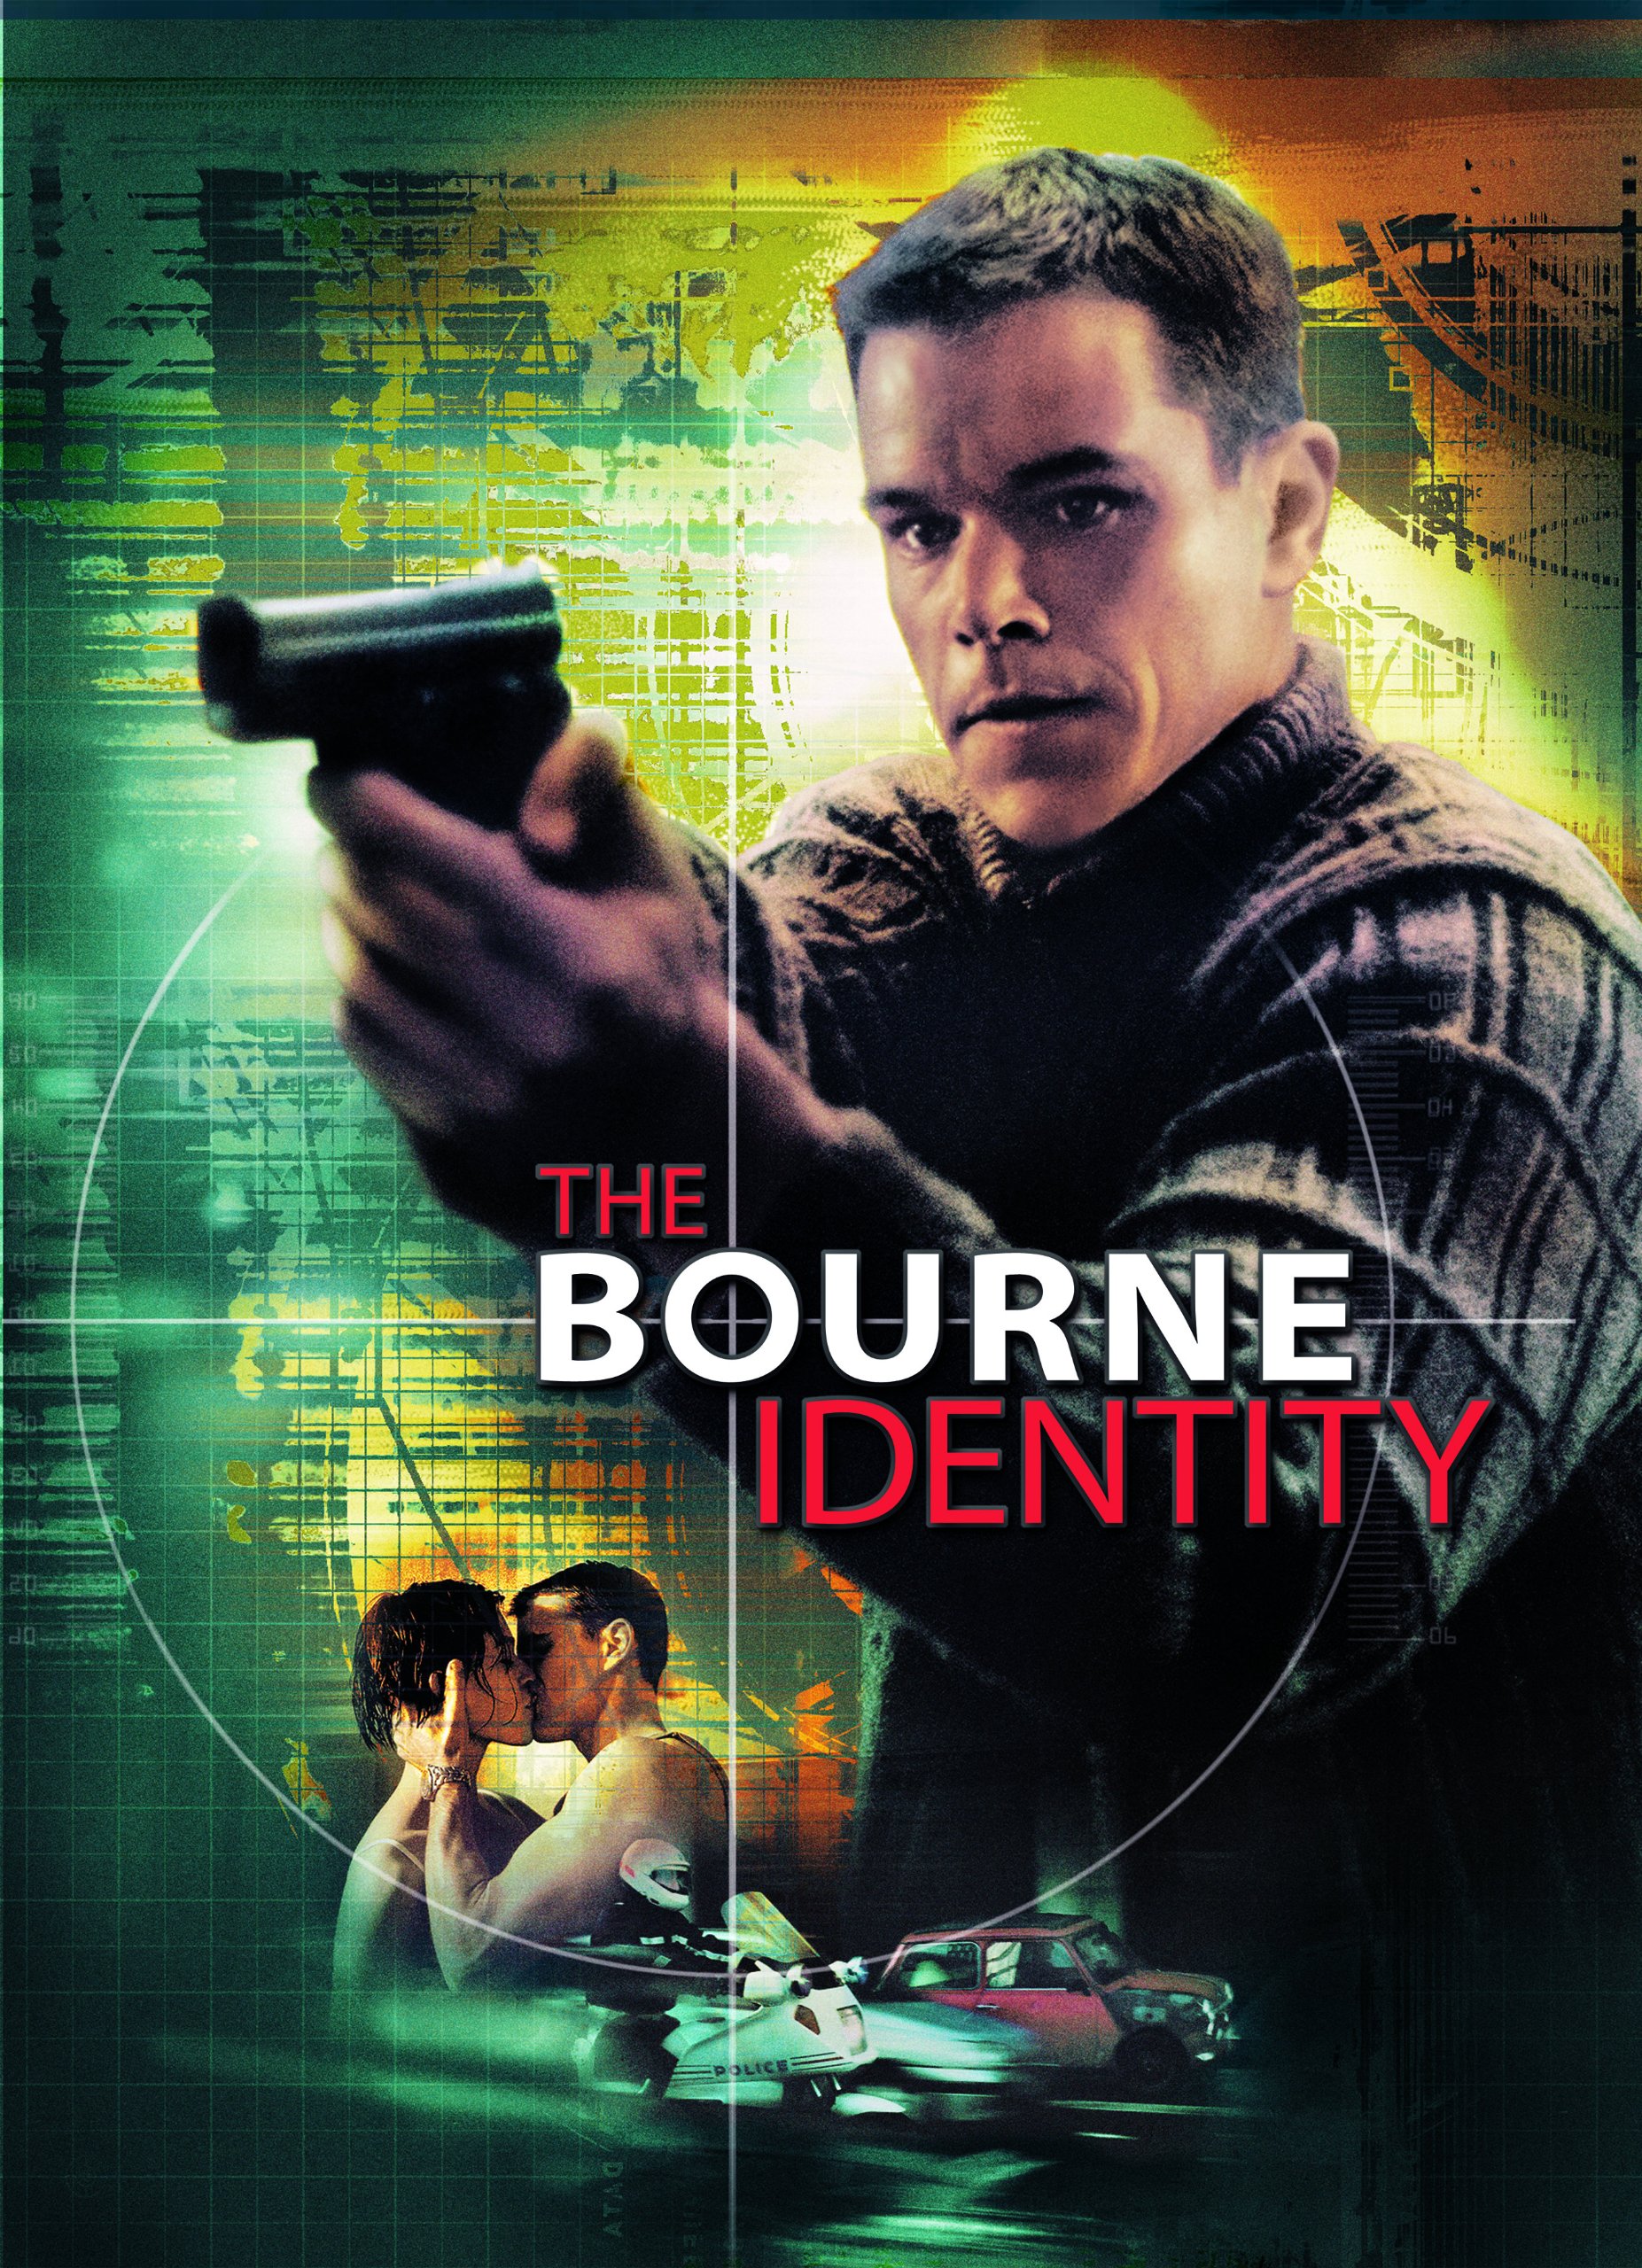 The Bourne Identity Wallpapers